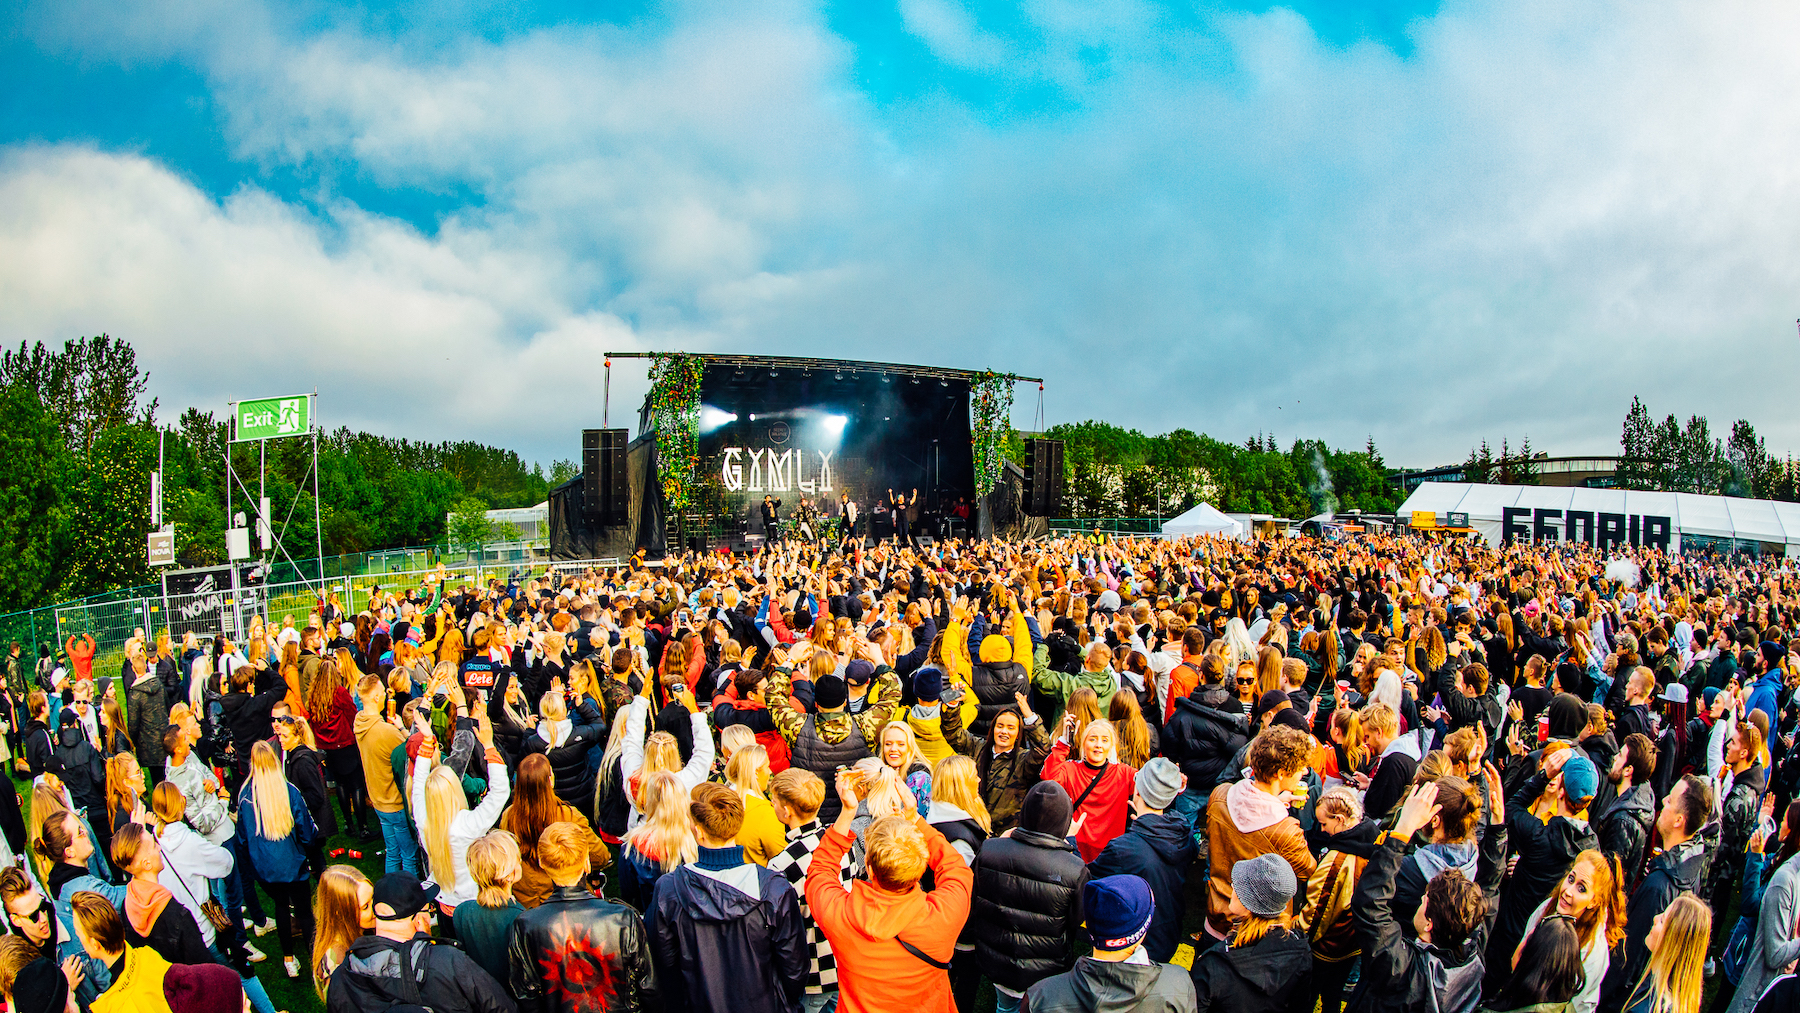 SECRET SOLSTICE 2019 reveals PHASE ONE LINEUP! Credit to Tobi Stoffels / Neon Photography